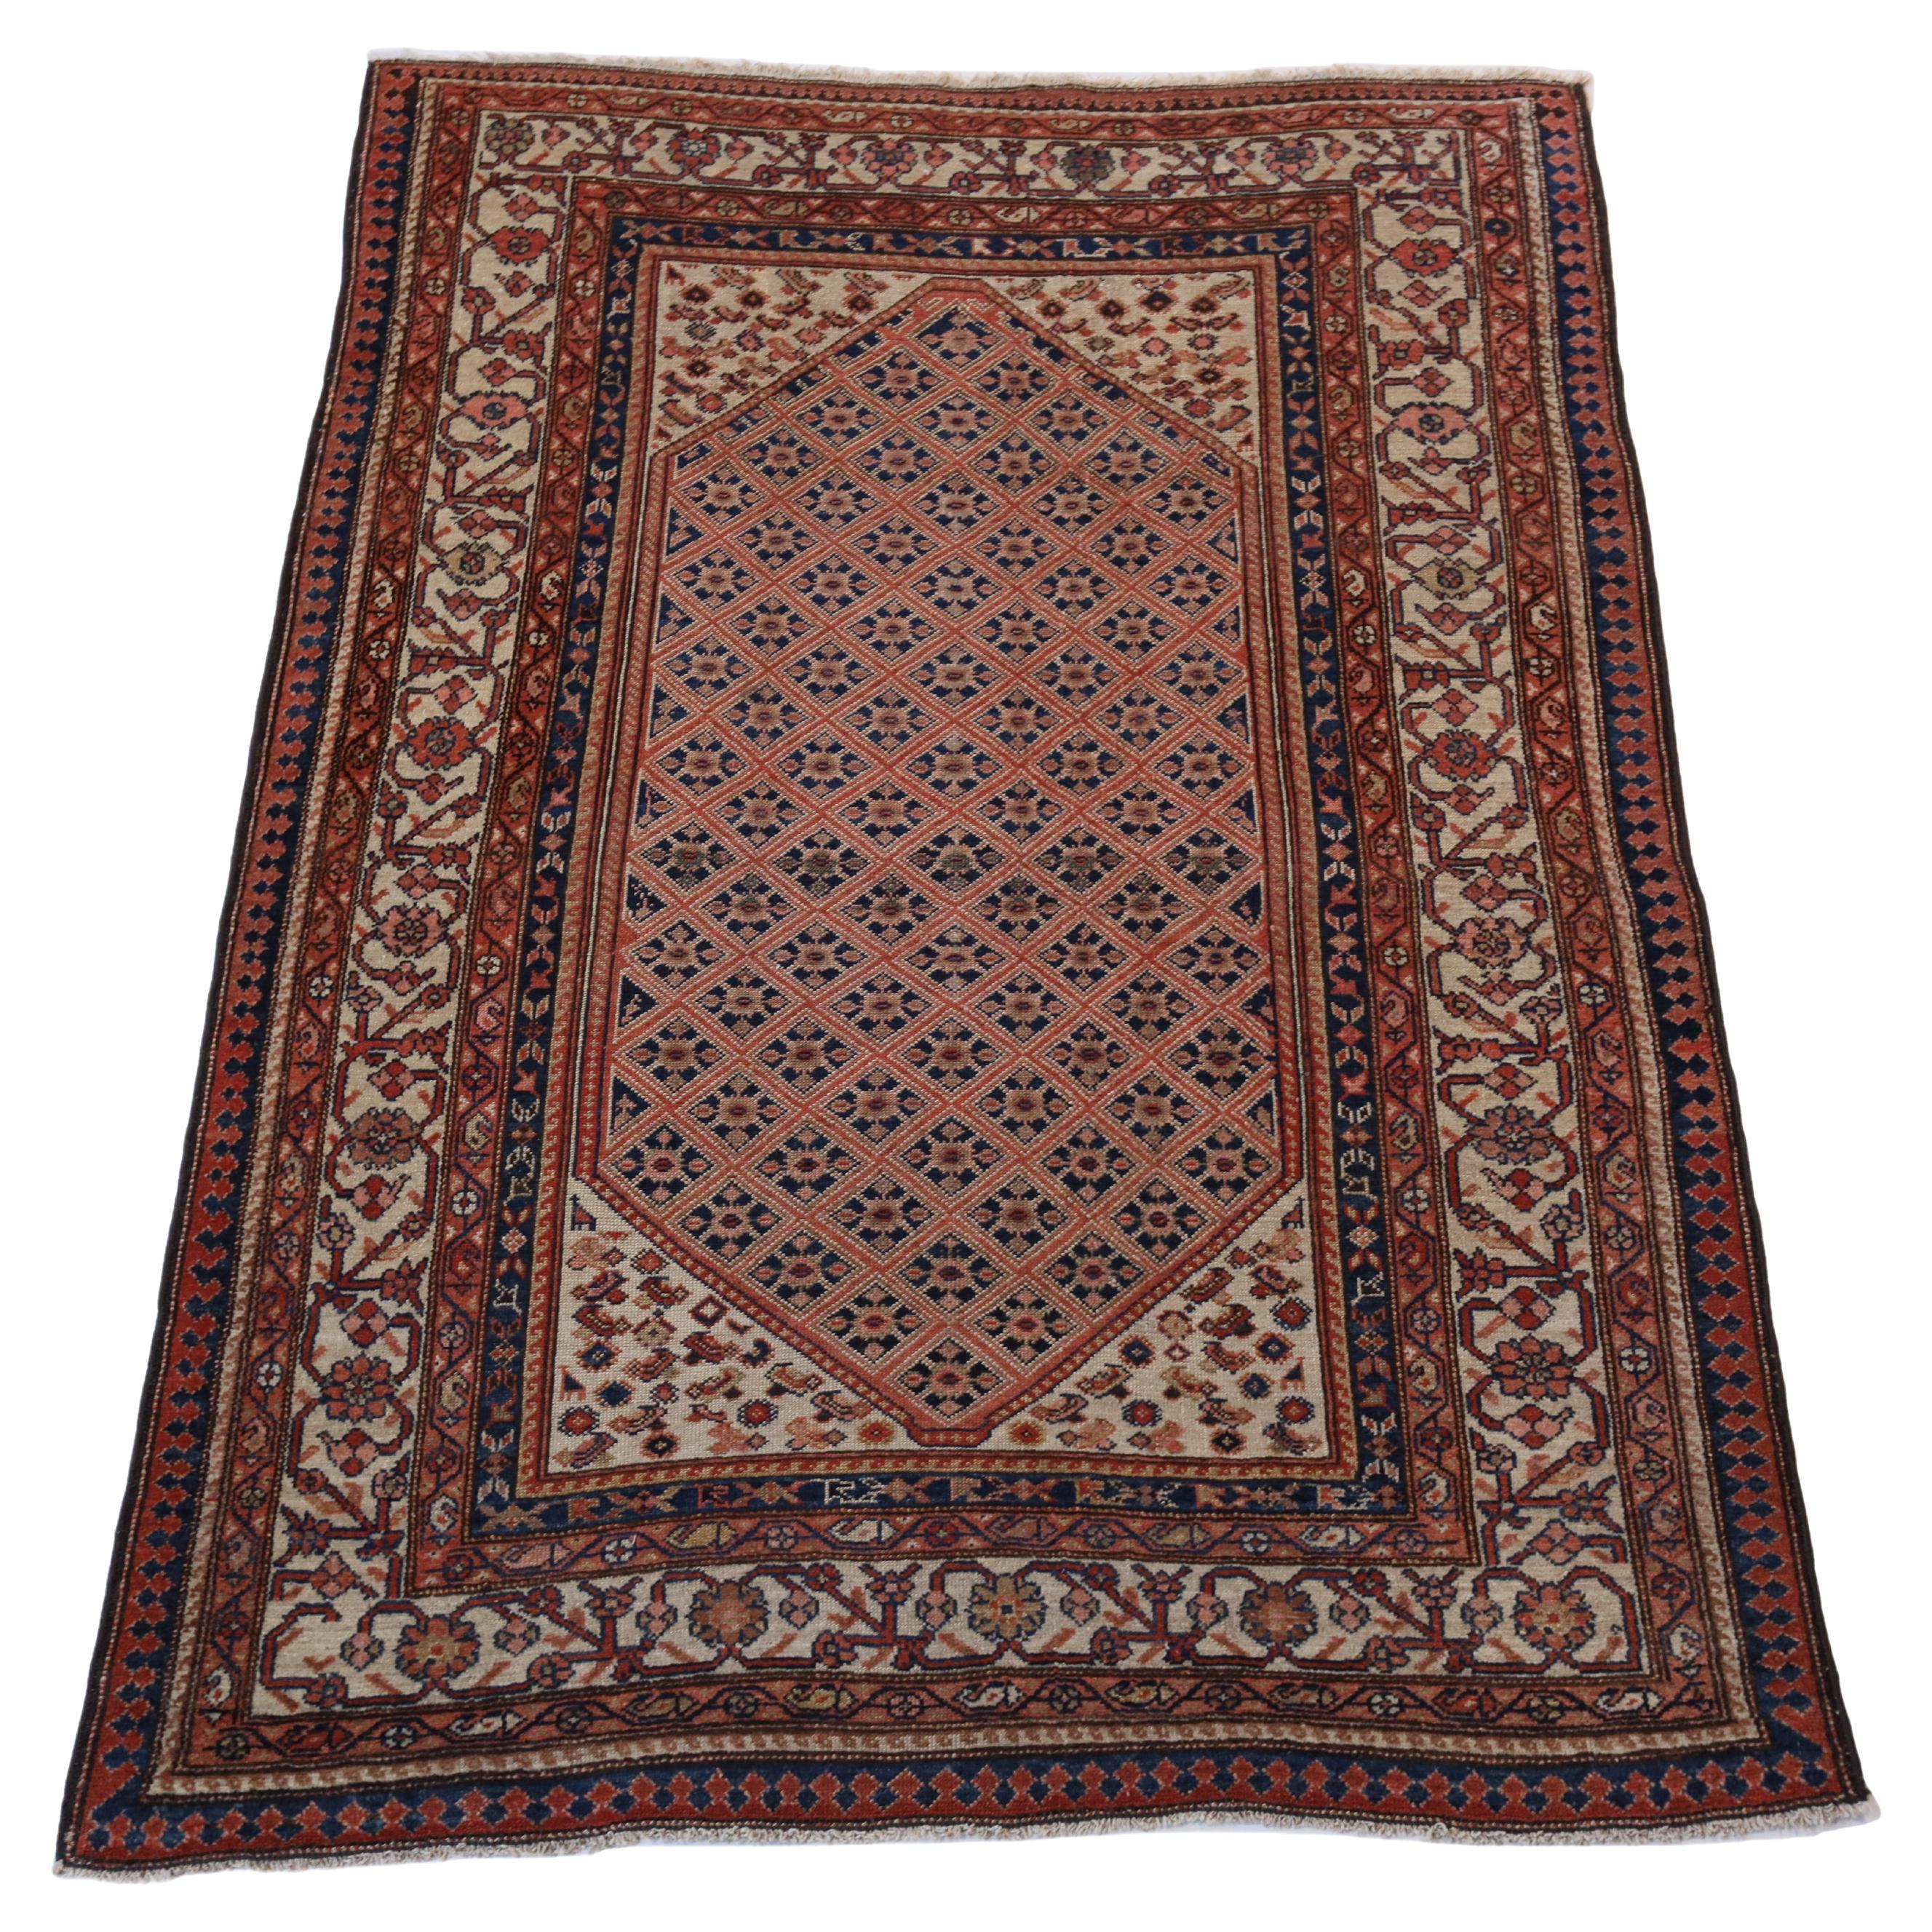 Malayer Antique Rug, Red Ivory Blue - 4 x 6